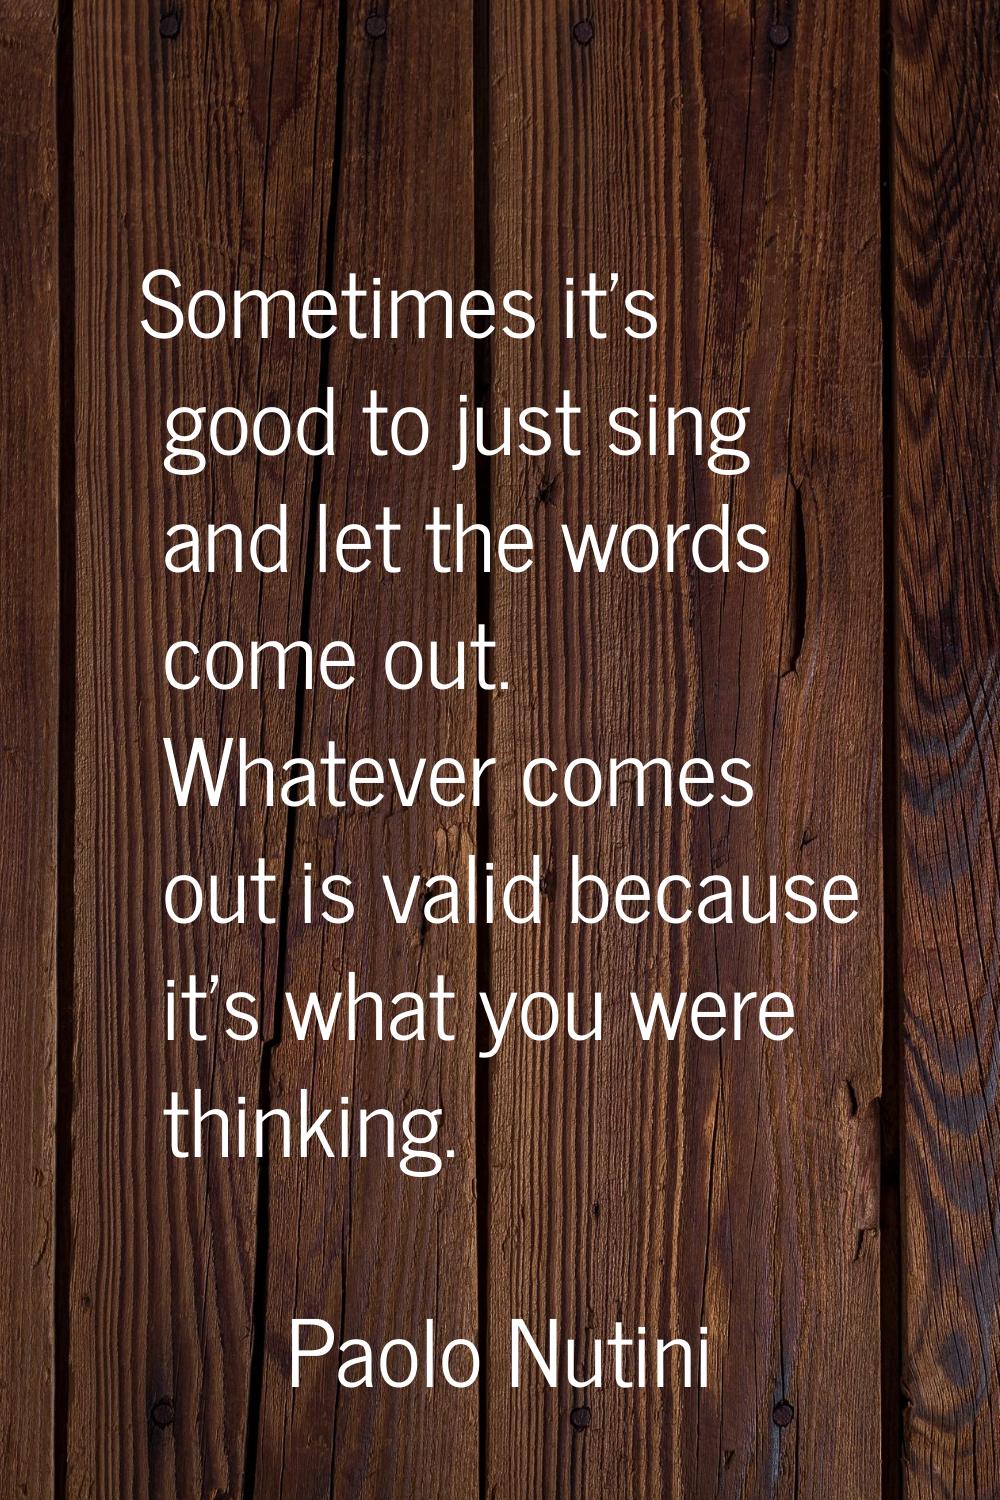 Sometimes it's good to just sing and let the words come out. Whatever comes out is valid because it